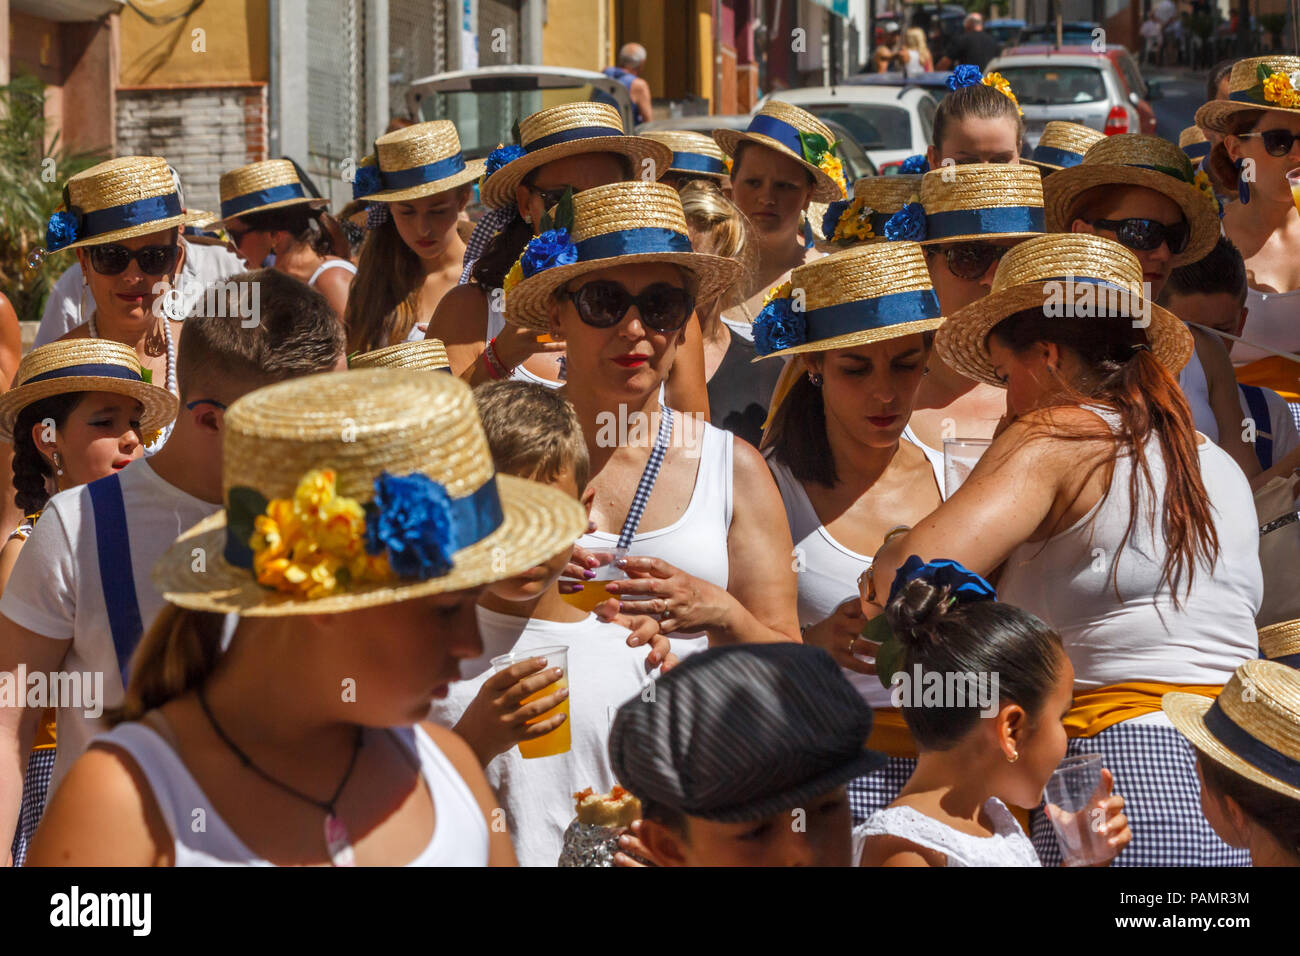 Arroyo de la Miel, Spain - 17/6/2018: Women in straw boaters in the fiesta parade. There are many festivities throughout the year. Stock Photo